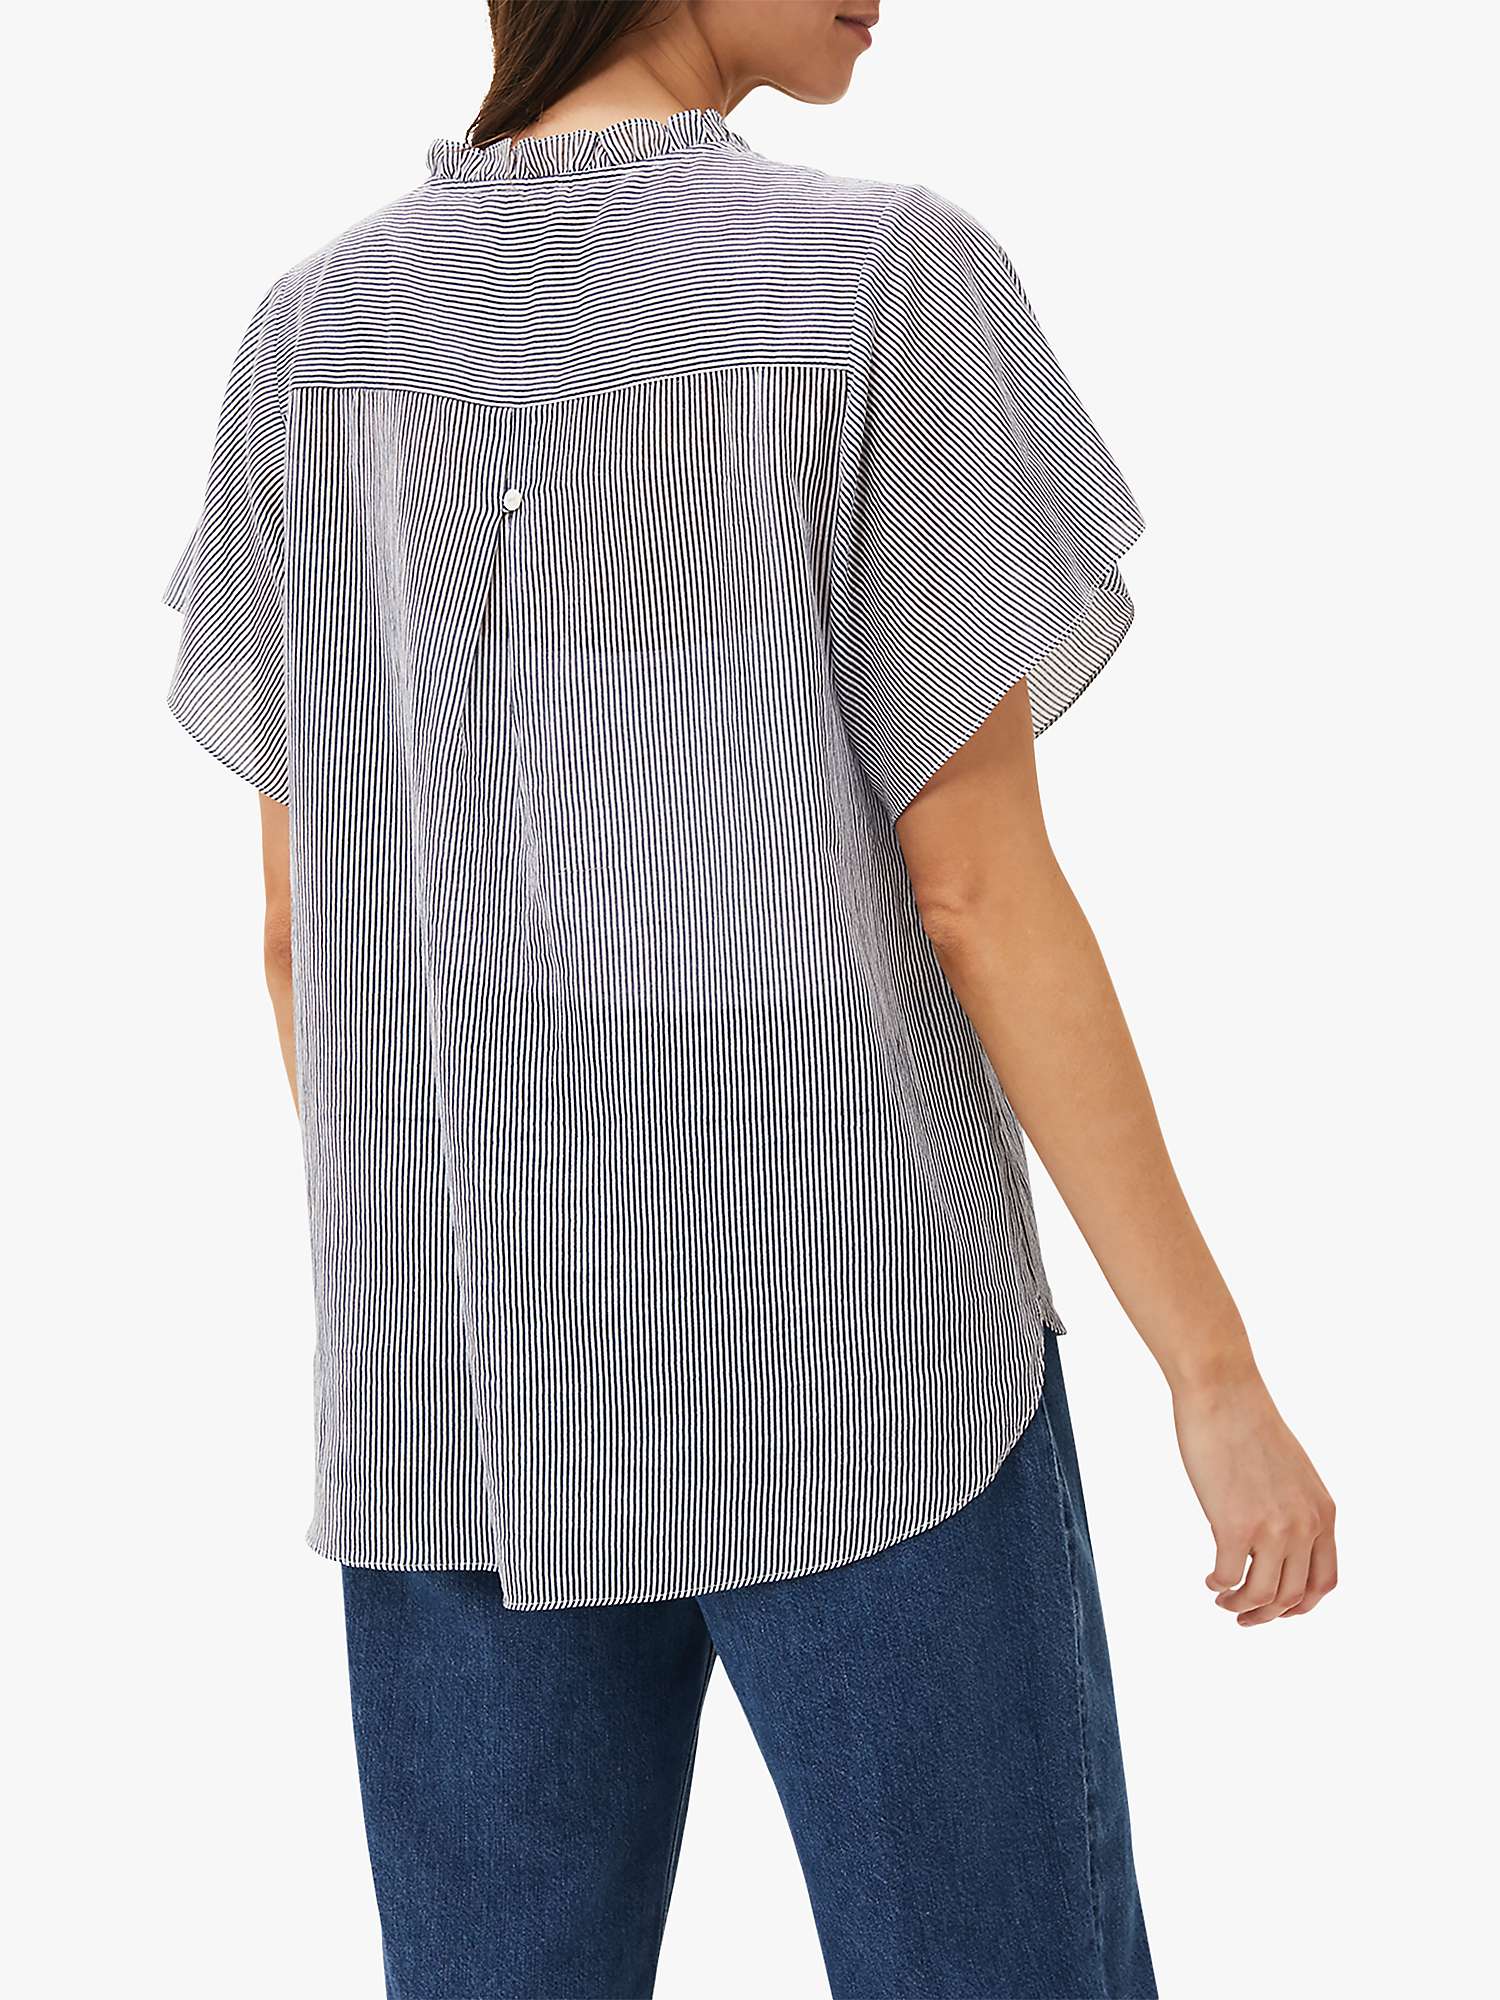 Buy Phase Eight Diya Frill Detail Striped Blouse, White/Soft Blue Online at johnlewis.com